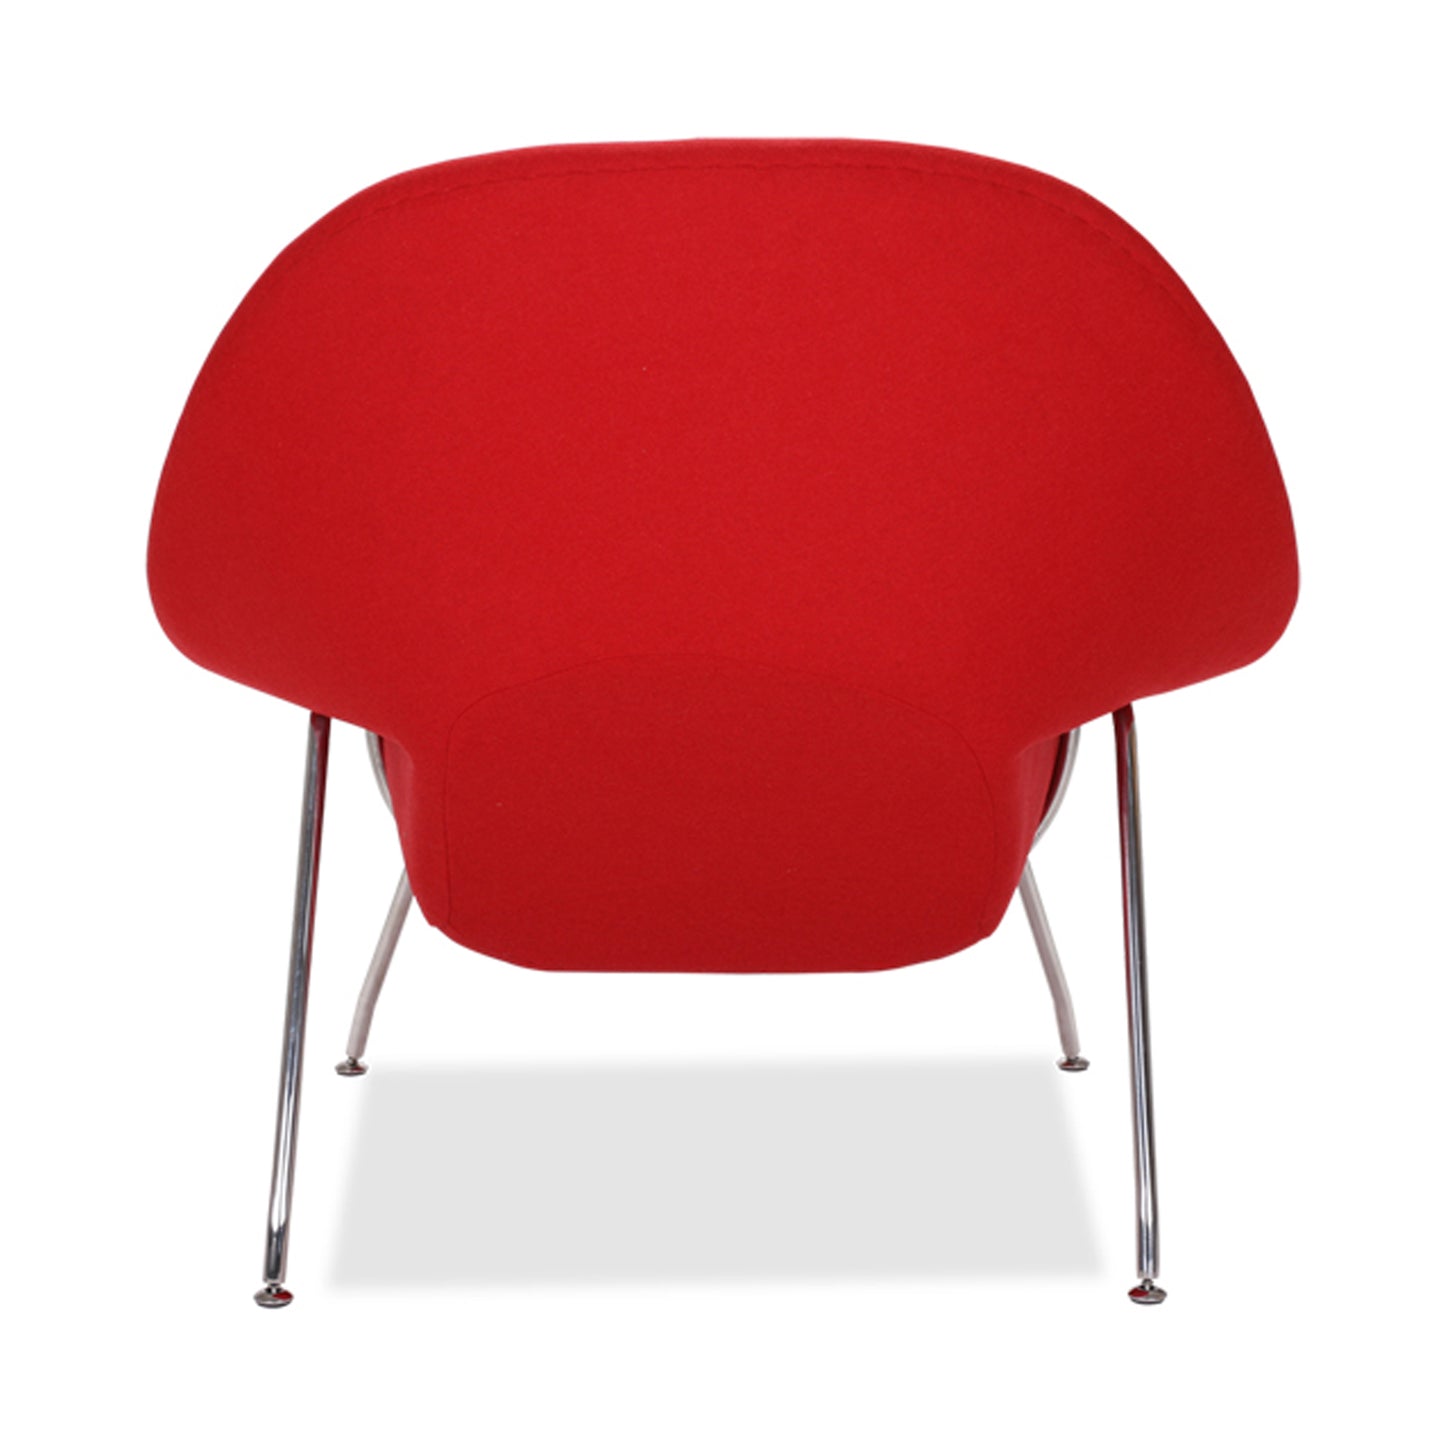 Haven Lounge Chair & Ottoman, Red